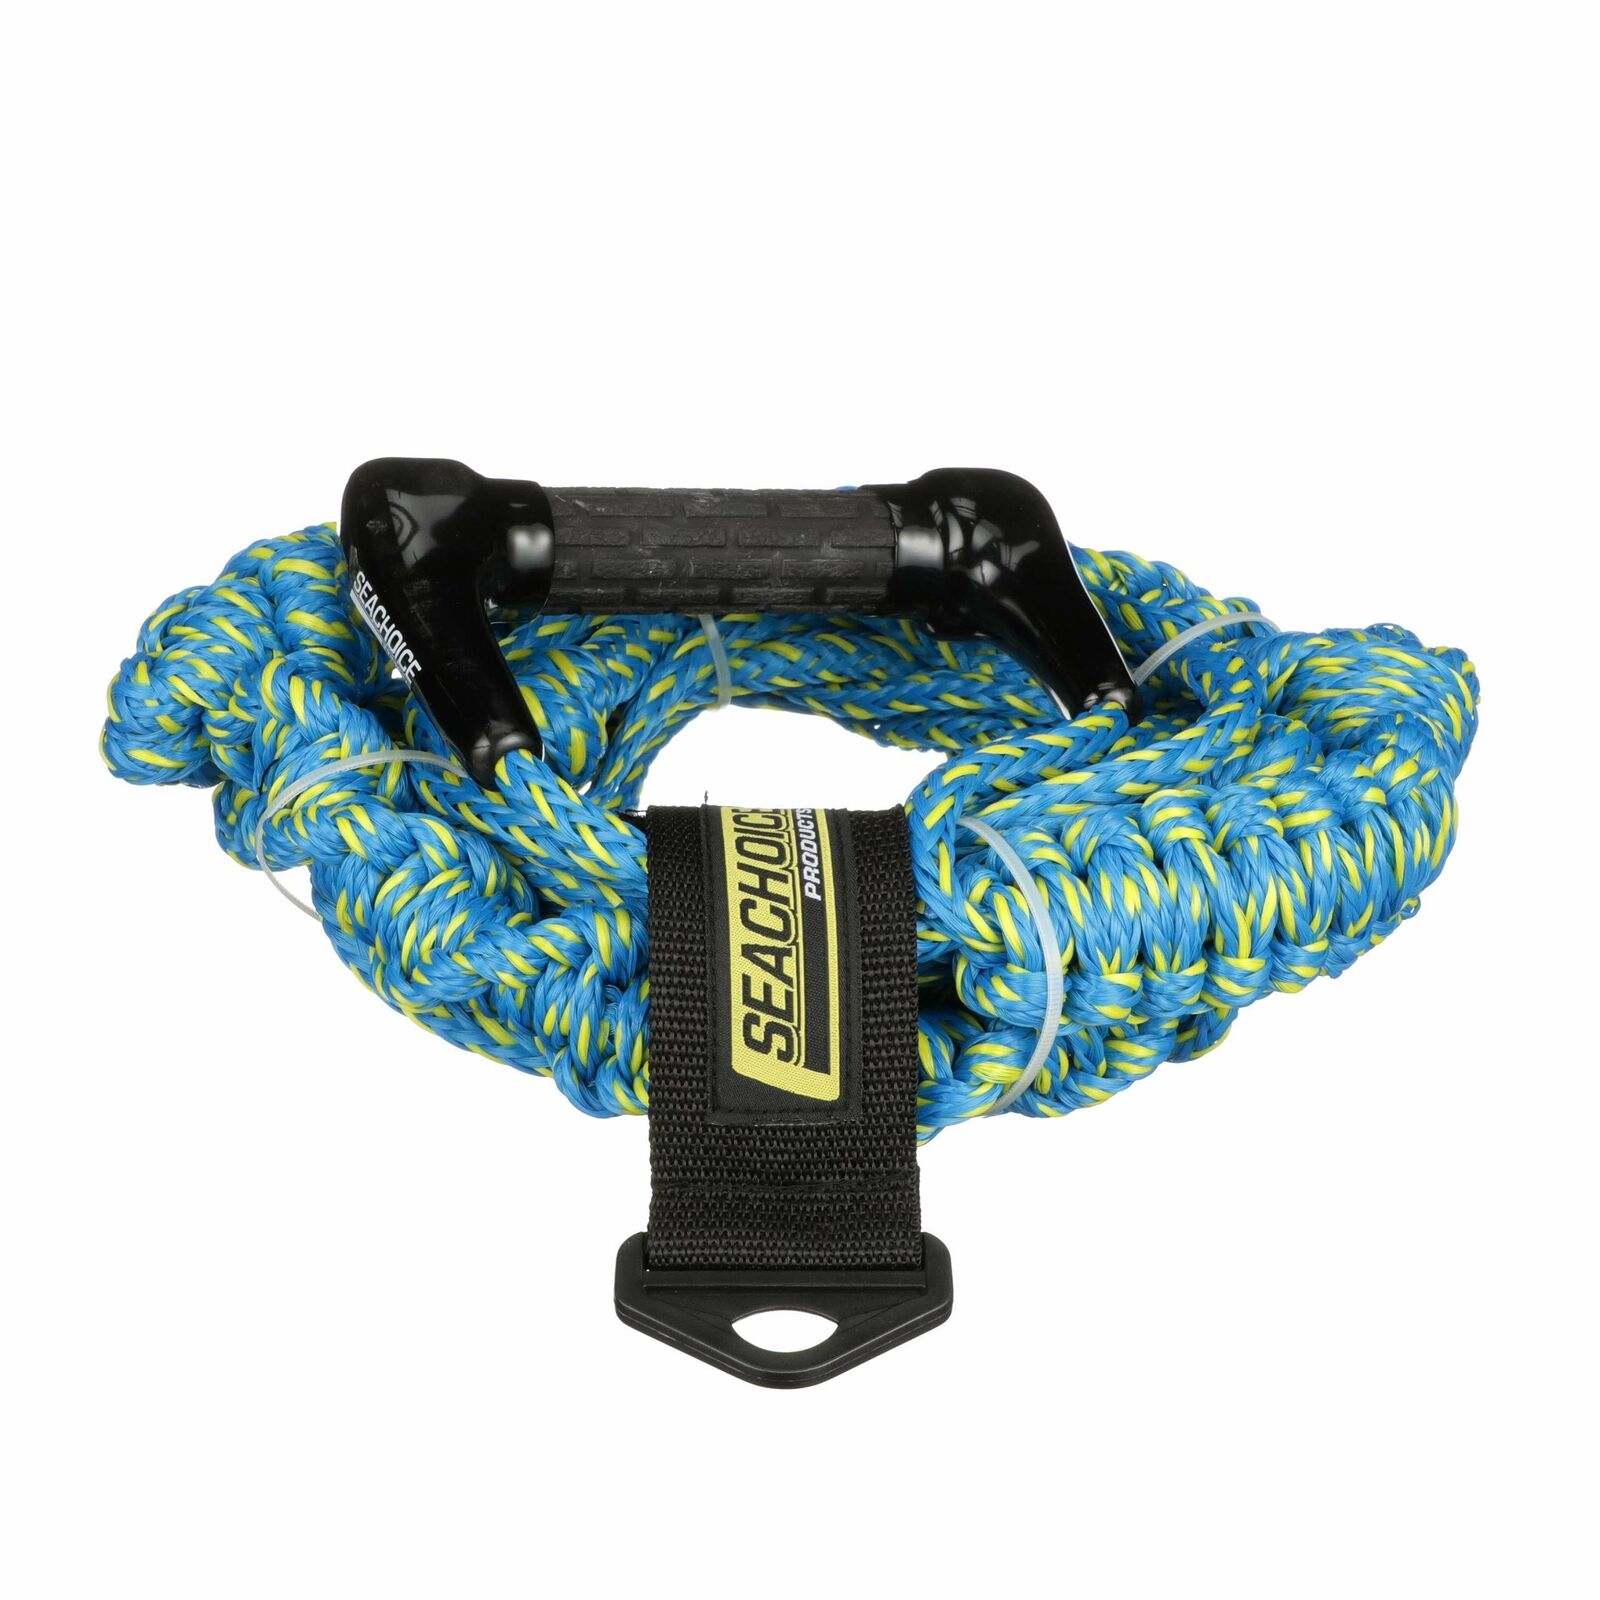 Seachoice 86764 3-Section Wakeboard Rope Extra-Large 16 – Sale special Ranking TOP15 price B Foot